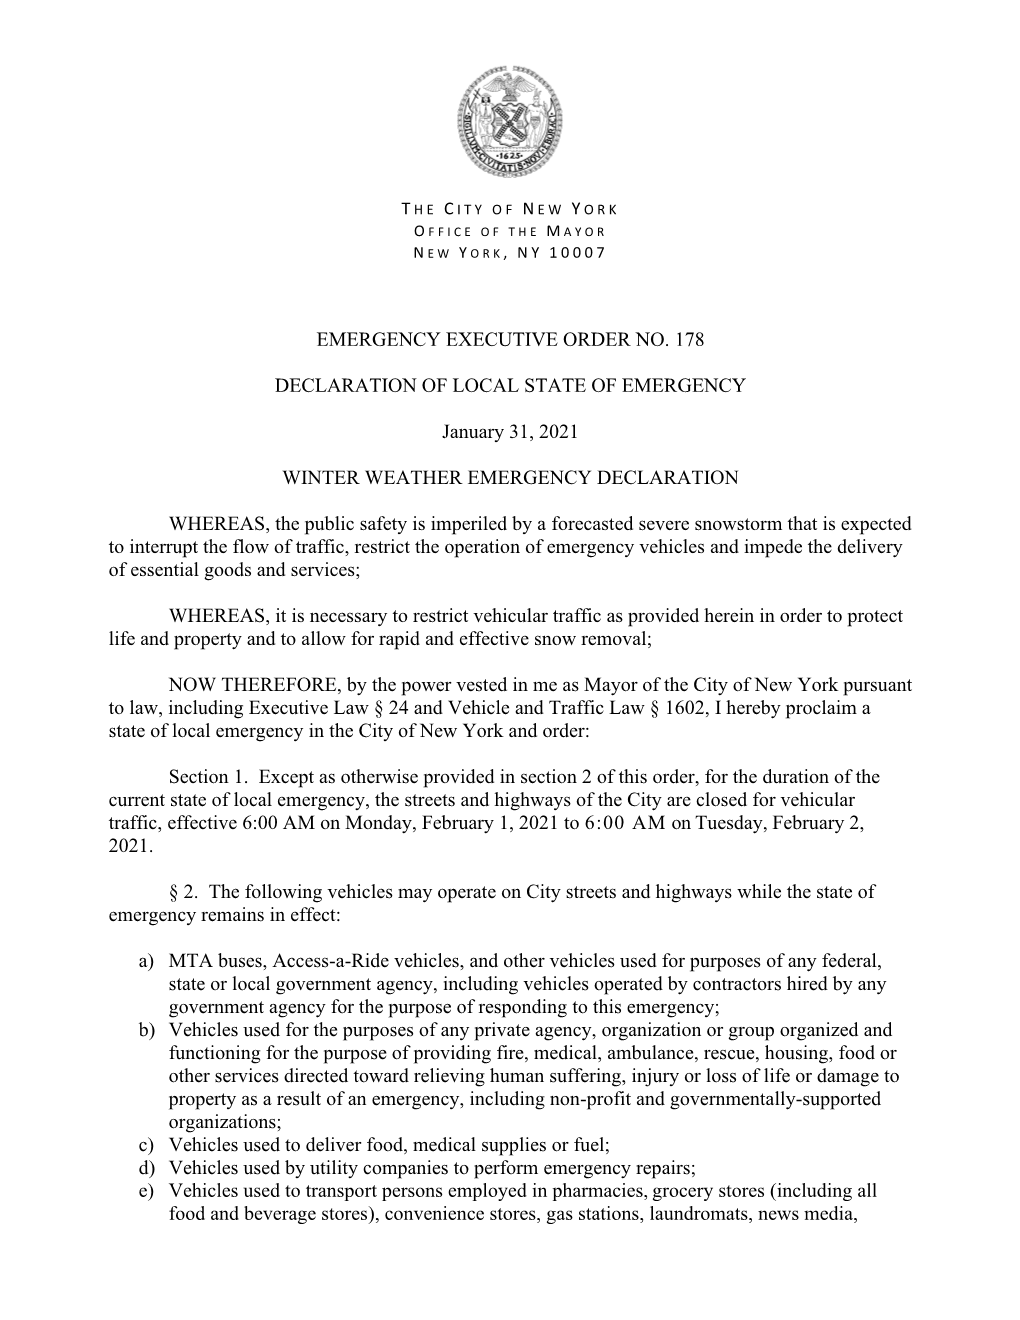 EMERGENCY EXECUTIVE ORDER NO. 178 DECLARATION of LOCAL STATE of EMERGENCY January 31, 2021 WINTER WEATHER EMERGENCY DECLARATION